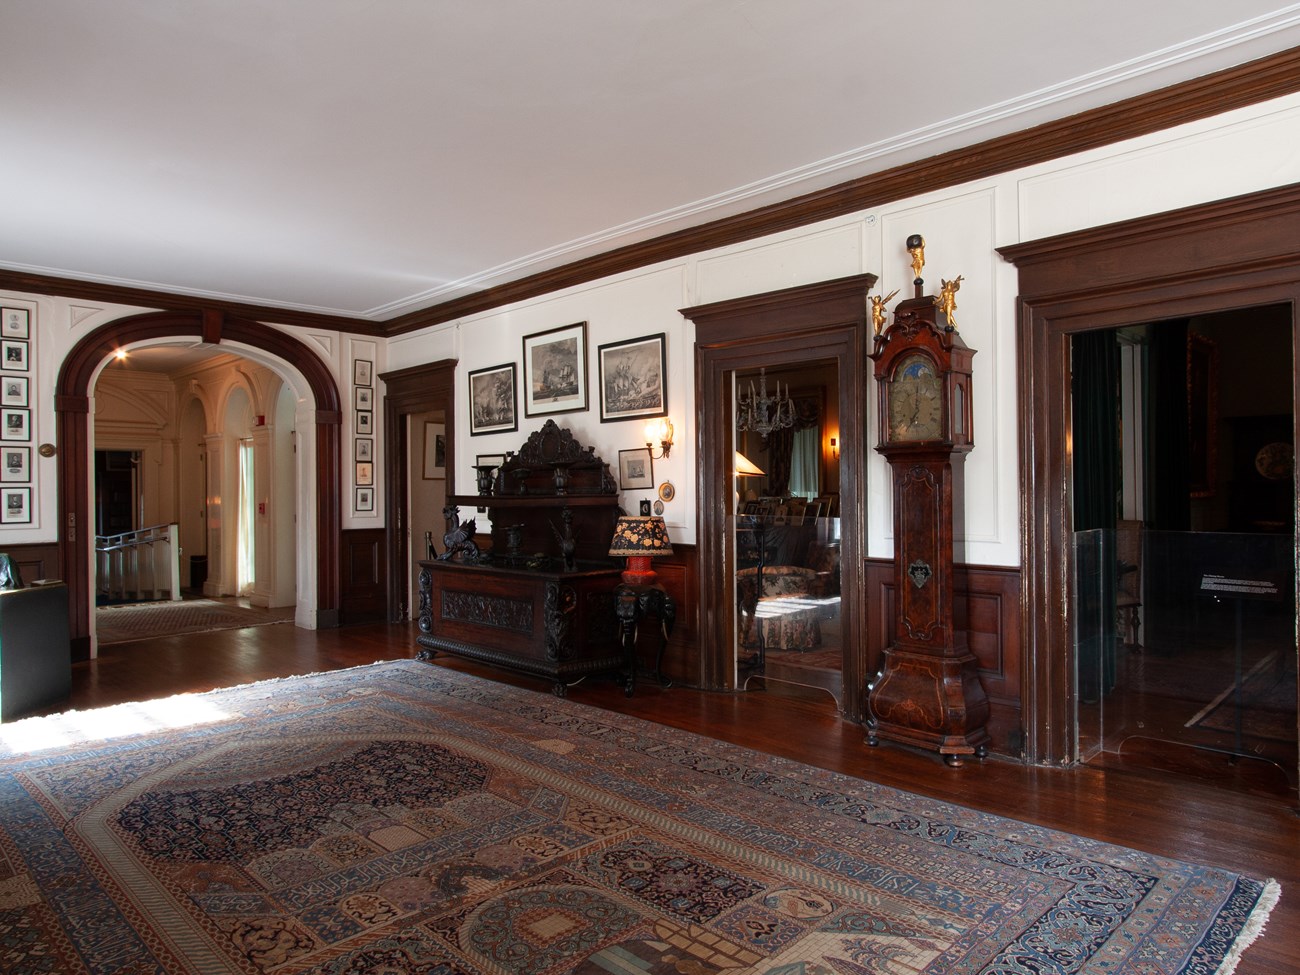 A room furnished with large oriental carpet, dark wood paneling and furniture, a grandfather clock, and many framed prints.